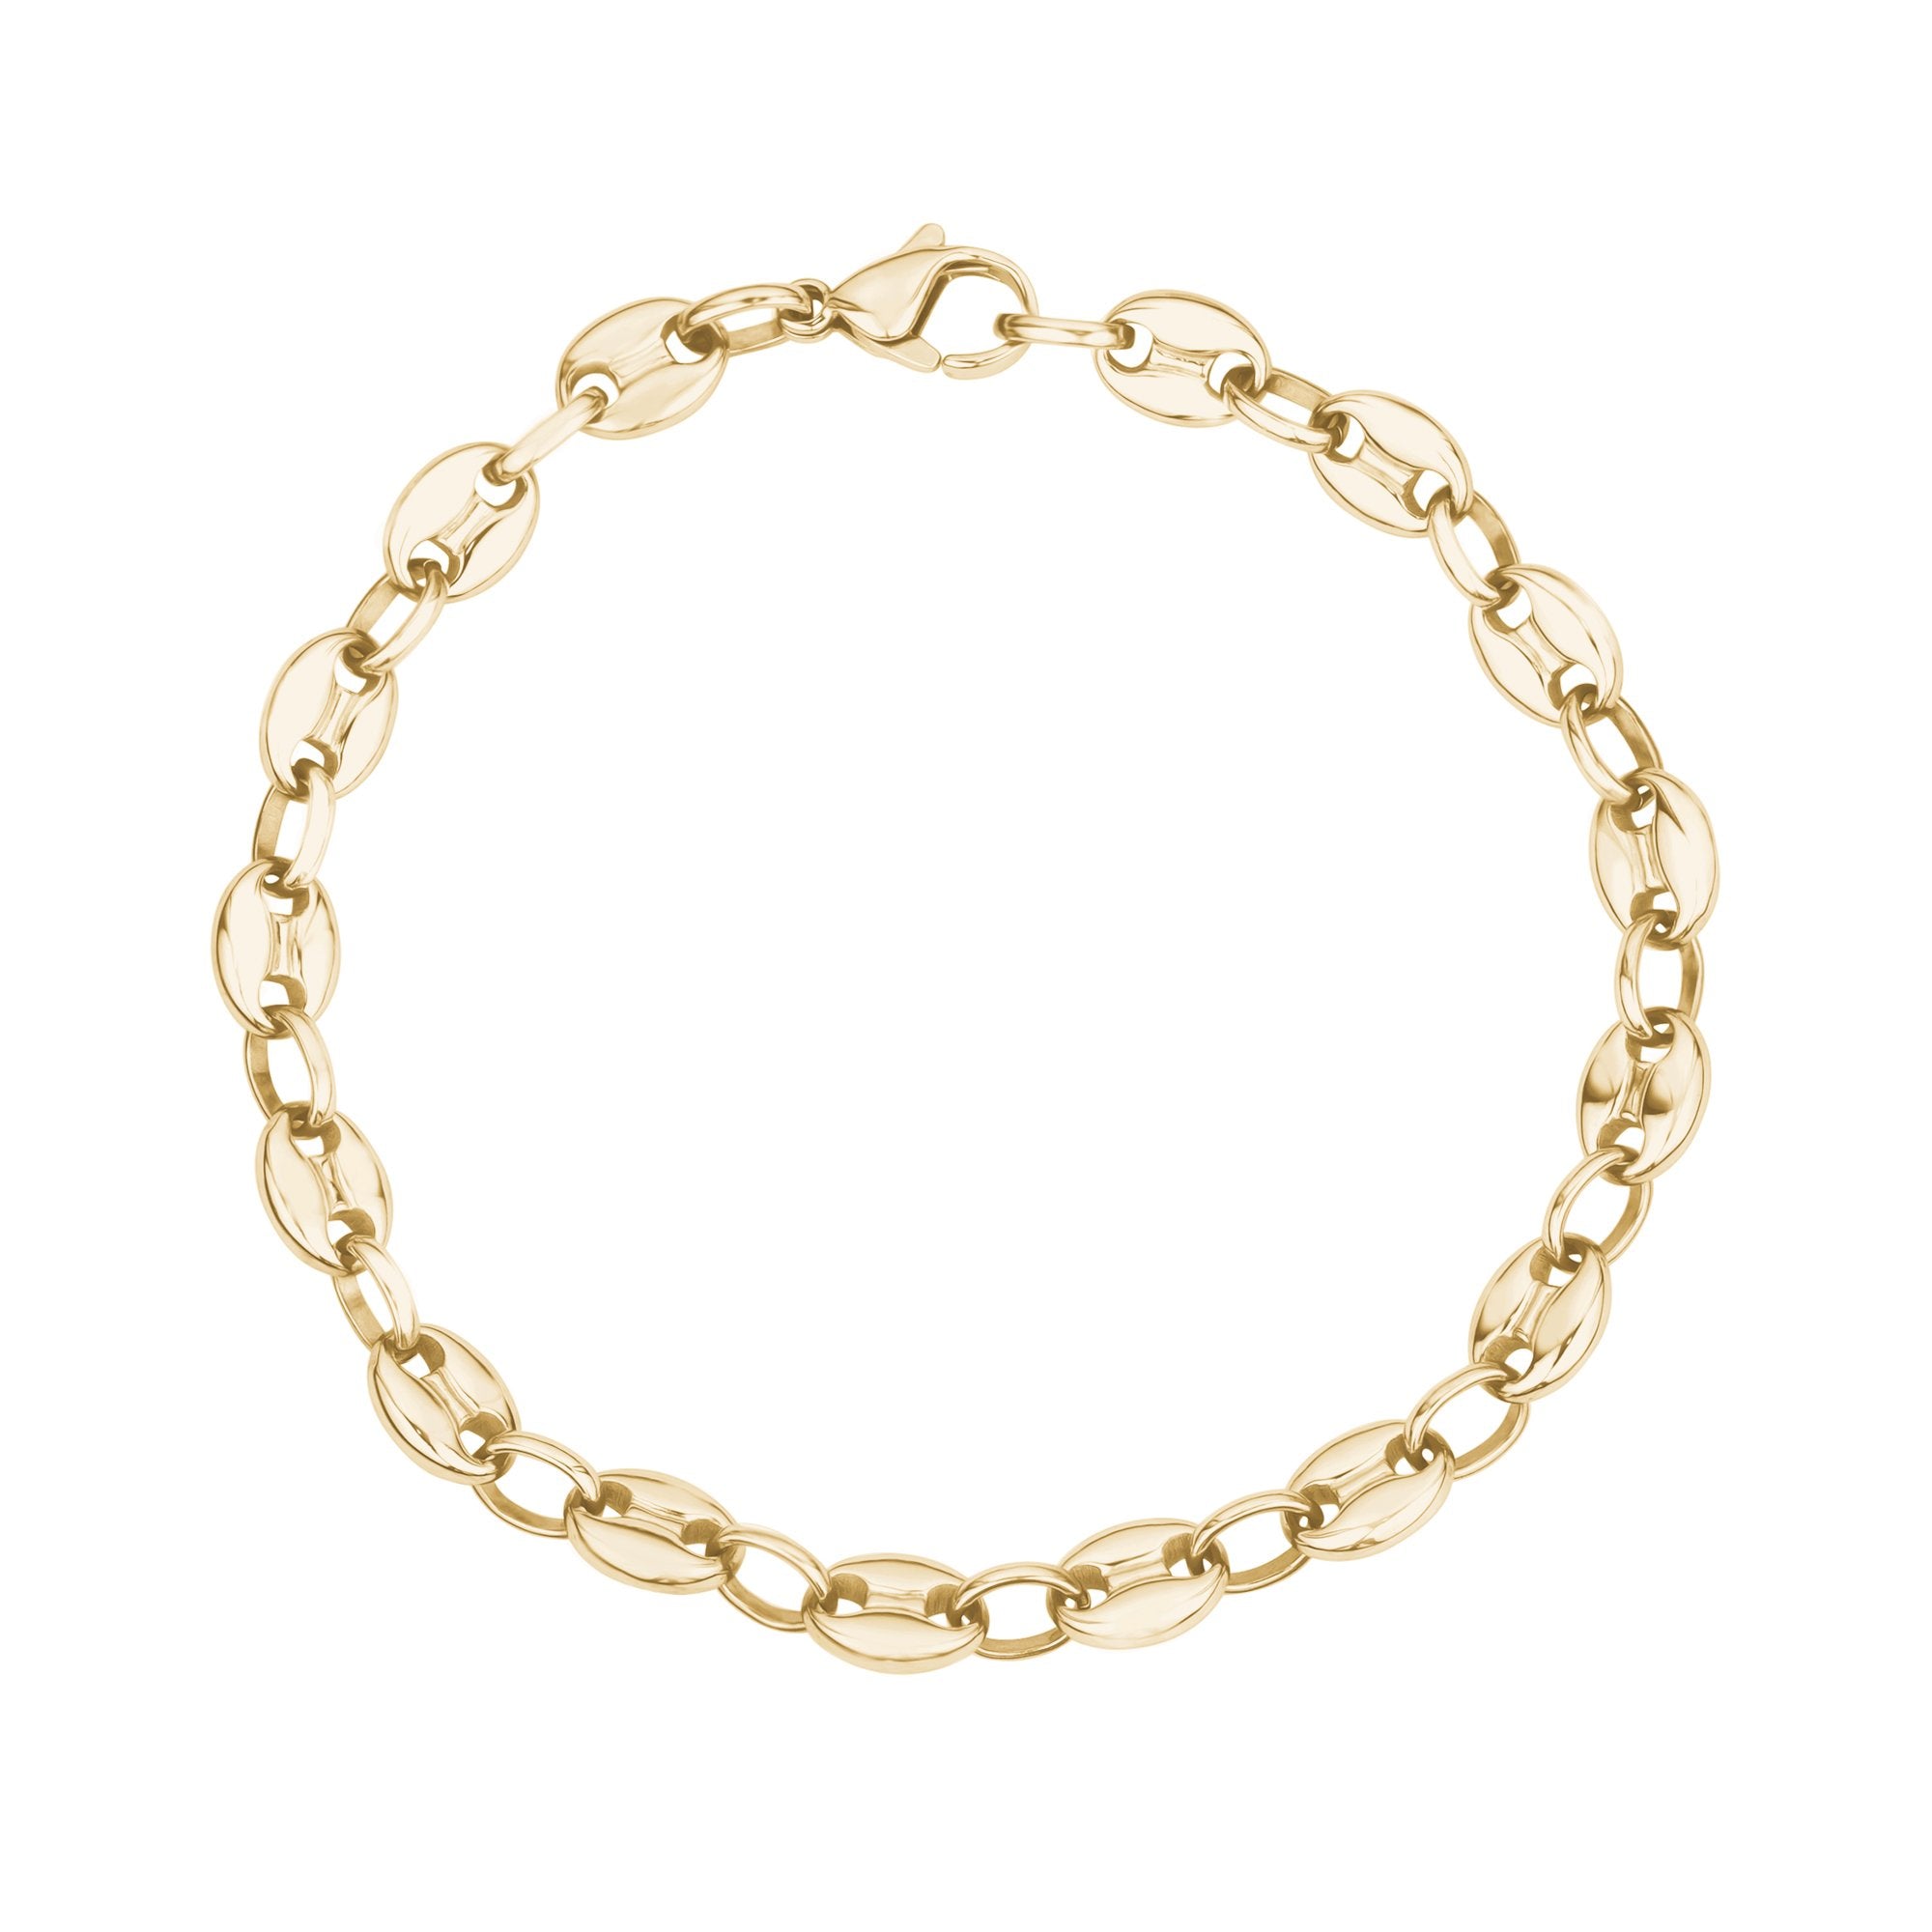 Women's Stainless Steel Coffee Bean Puffy Link Gold Bracelet – The 